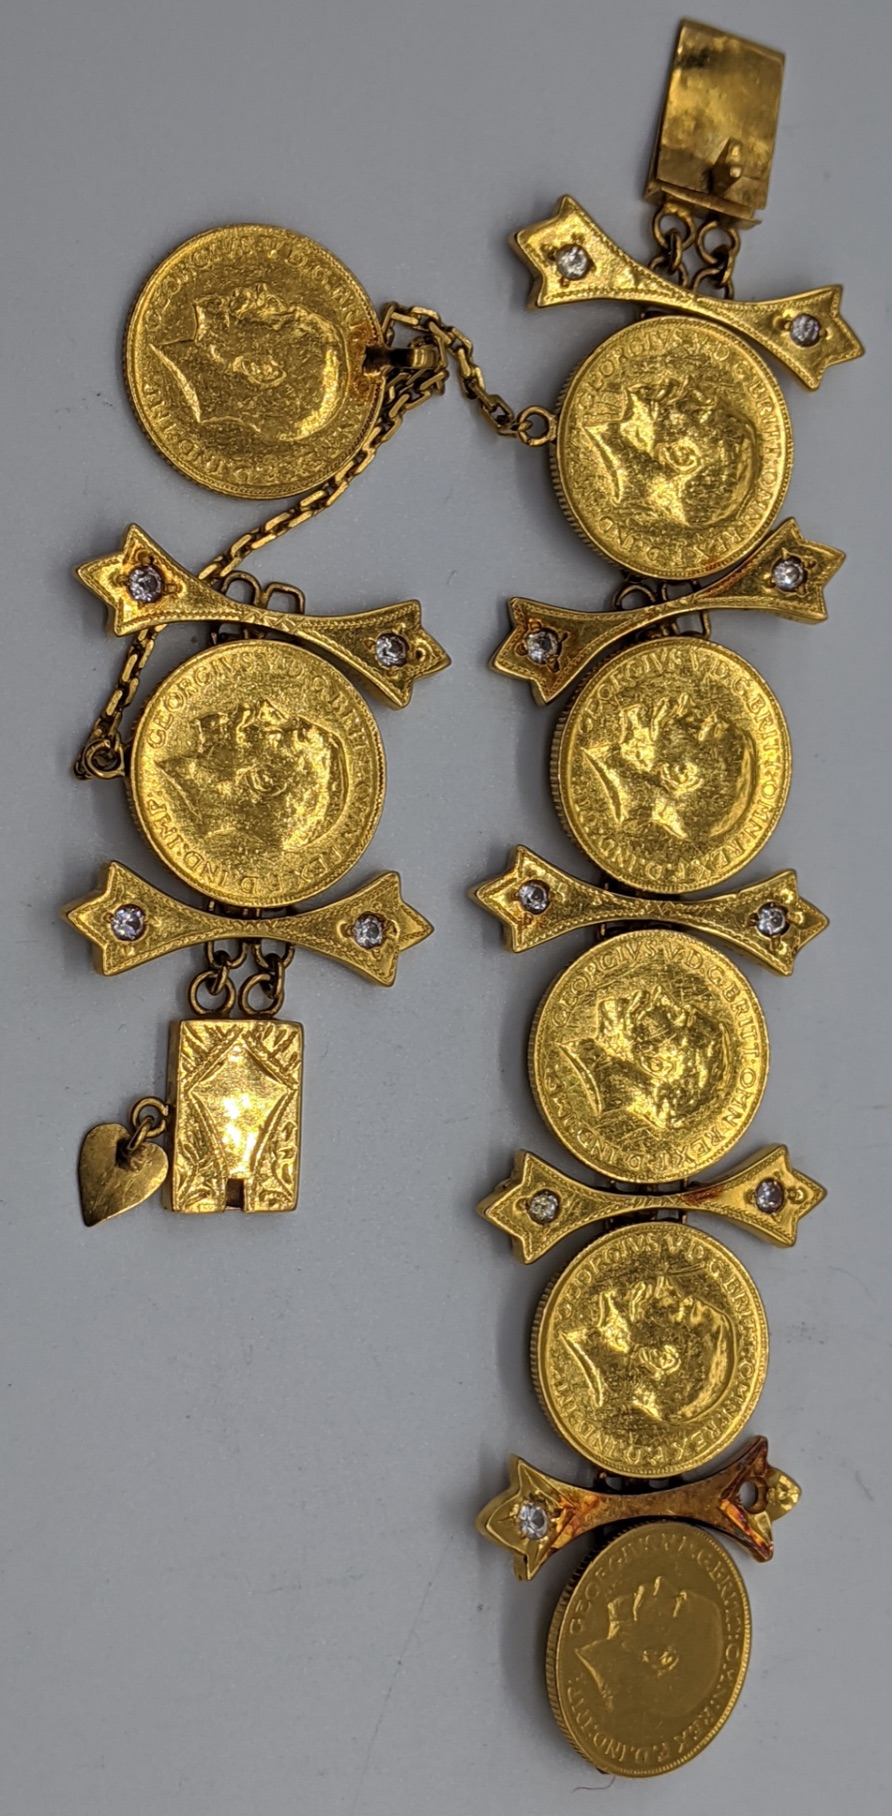 A gold and diamond bracelet mounted with 7 full sovereign coins, the links are unmarked but test as